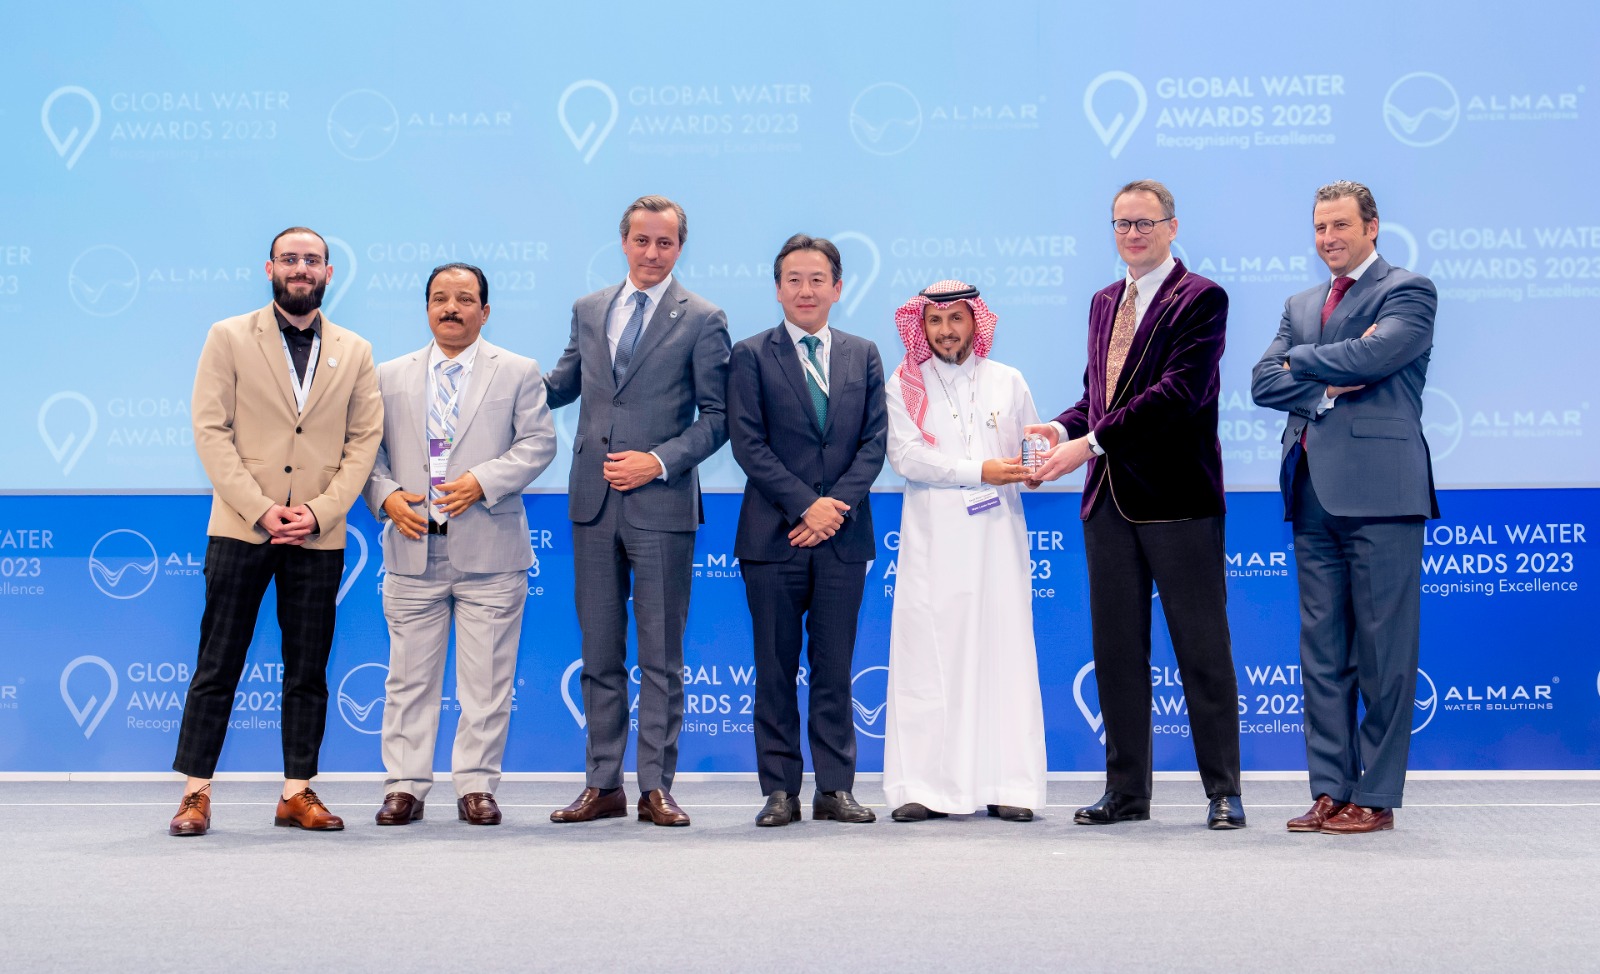 SHUQAIQ 3 SWRO RECOGNIZED BY THE GLOBAL WATER INDUSTRY